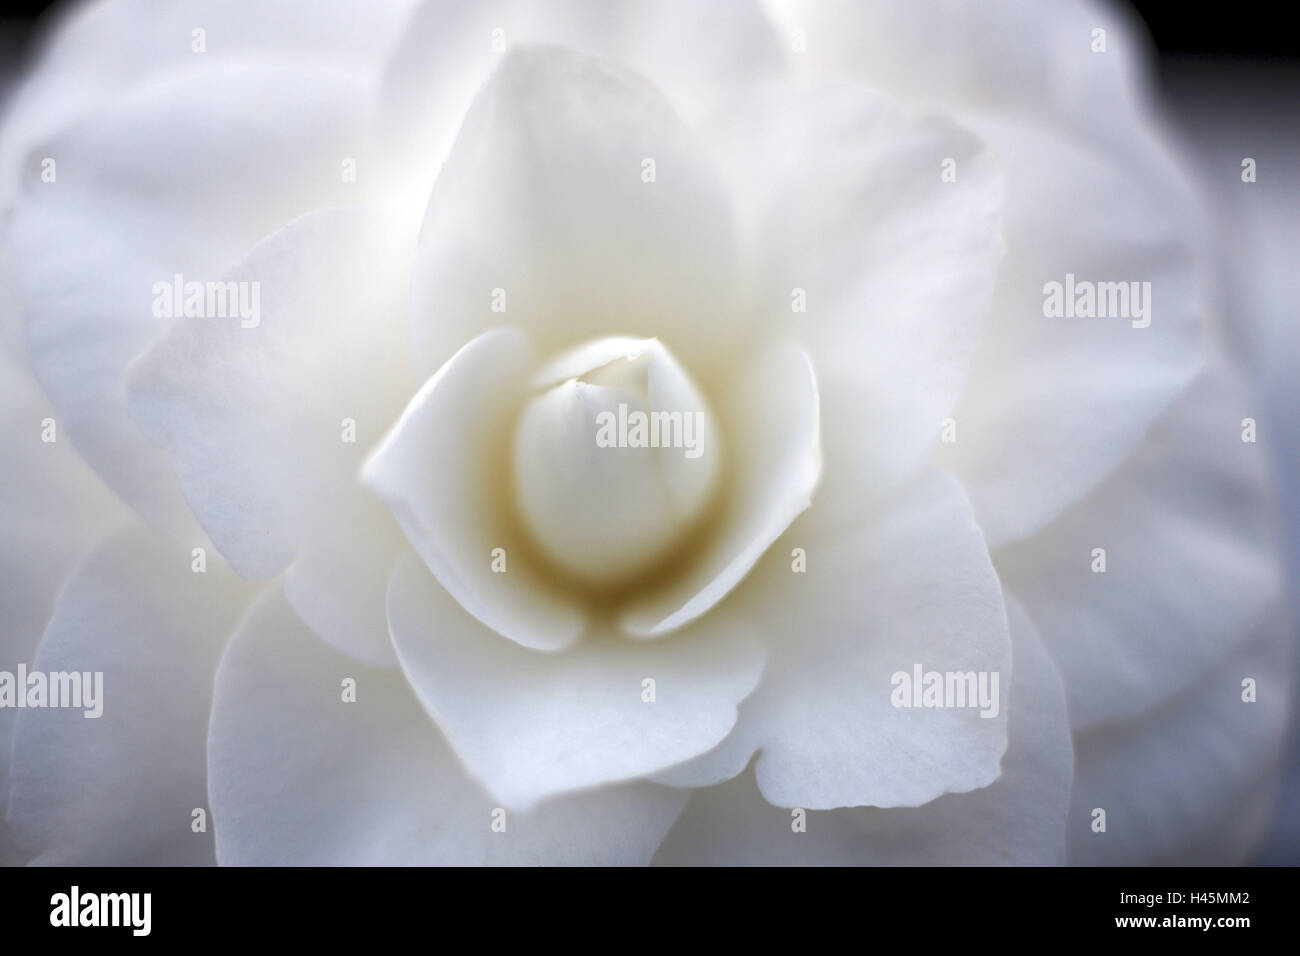 Japanese camellia, Camellia japonica, blossom, medium close-up, camellia, flower blossom, flower, white, openly, ornamental plant, odour, icon, wellness, softly, cleanness, Stock Photo